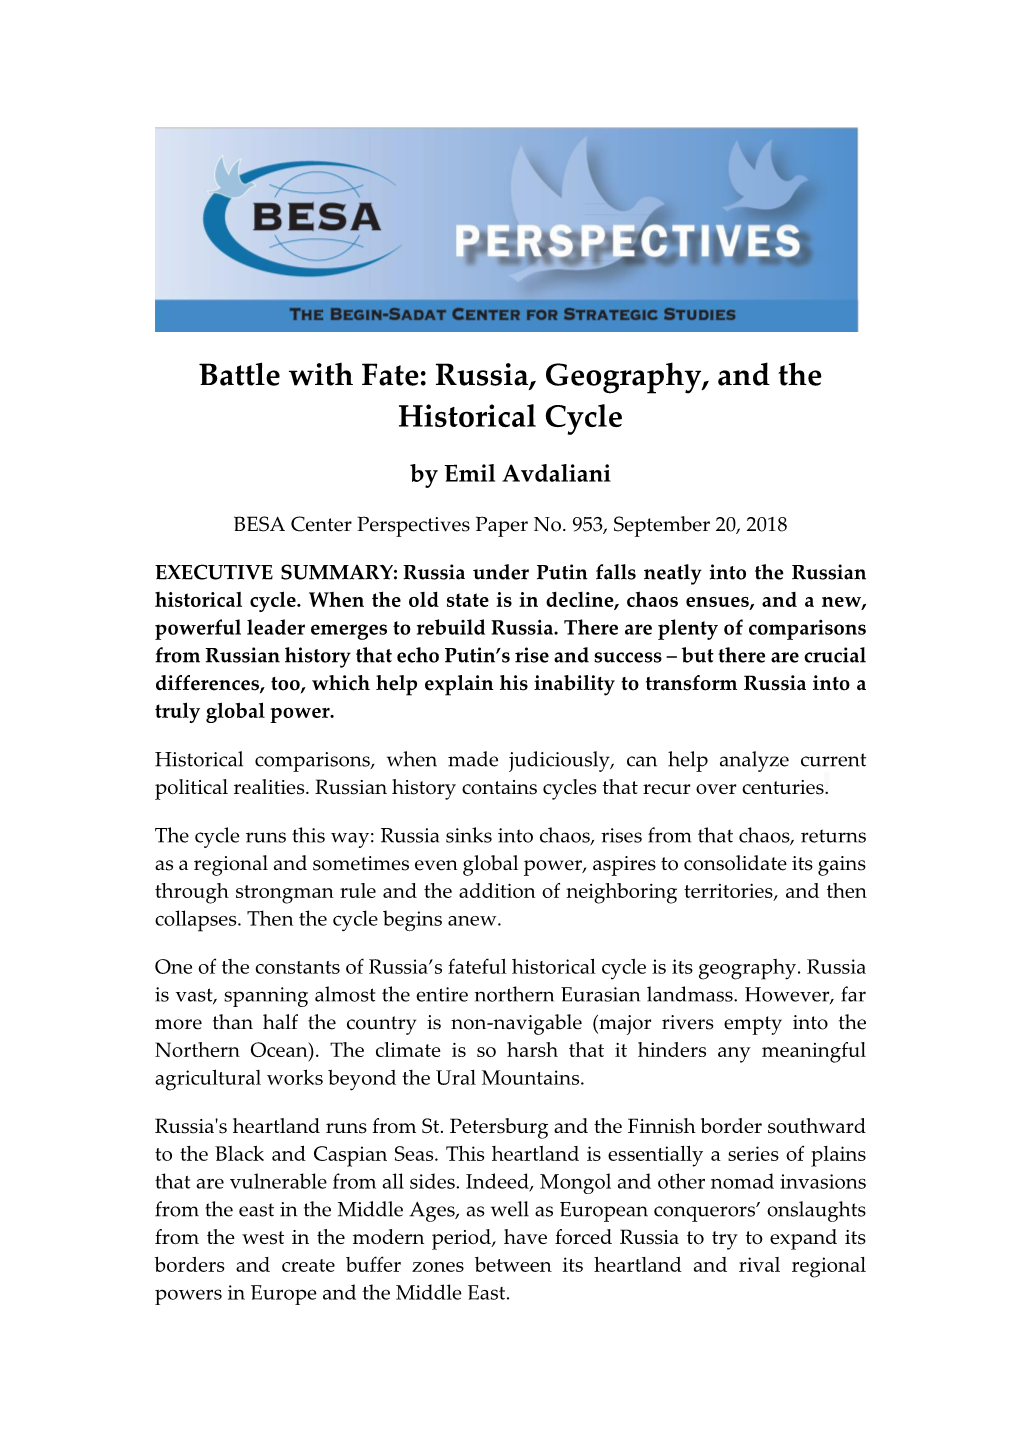 Battle with Fate: Russia, Geography, and the Historical Cycle